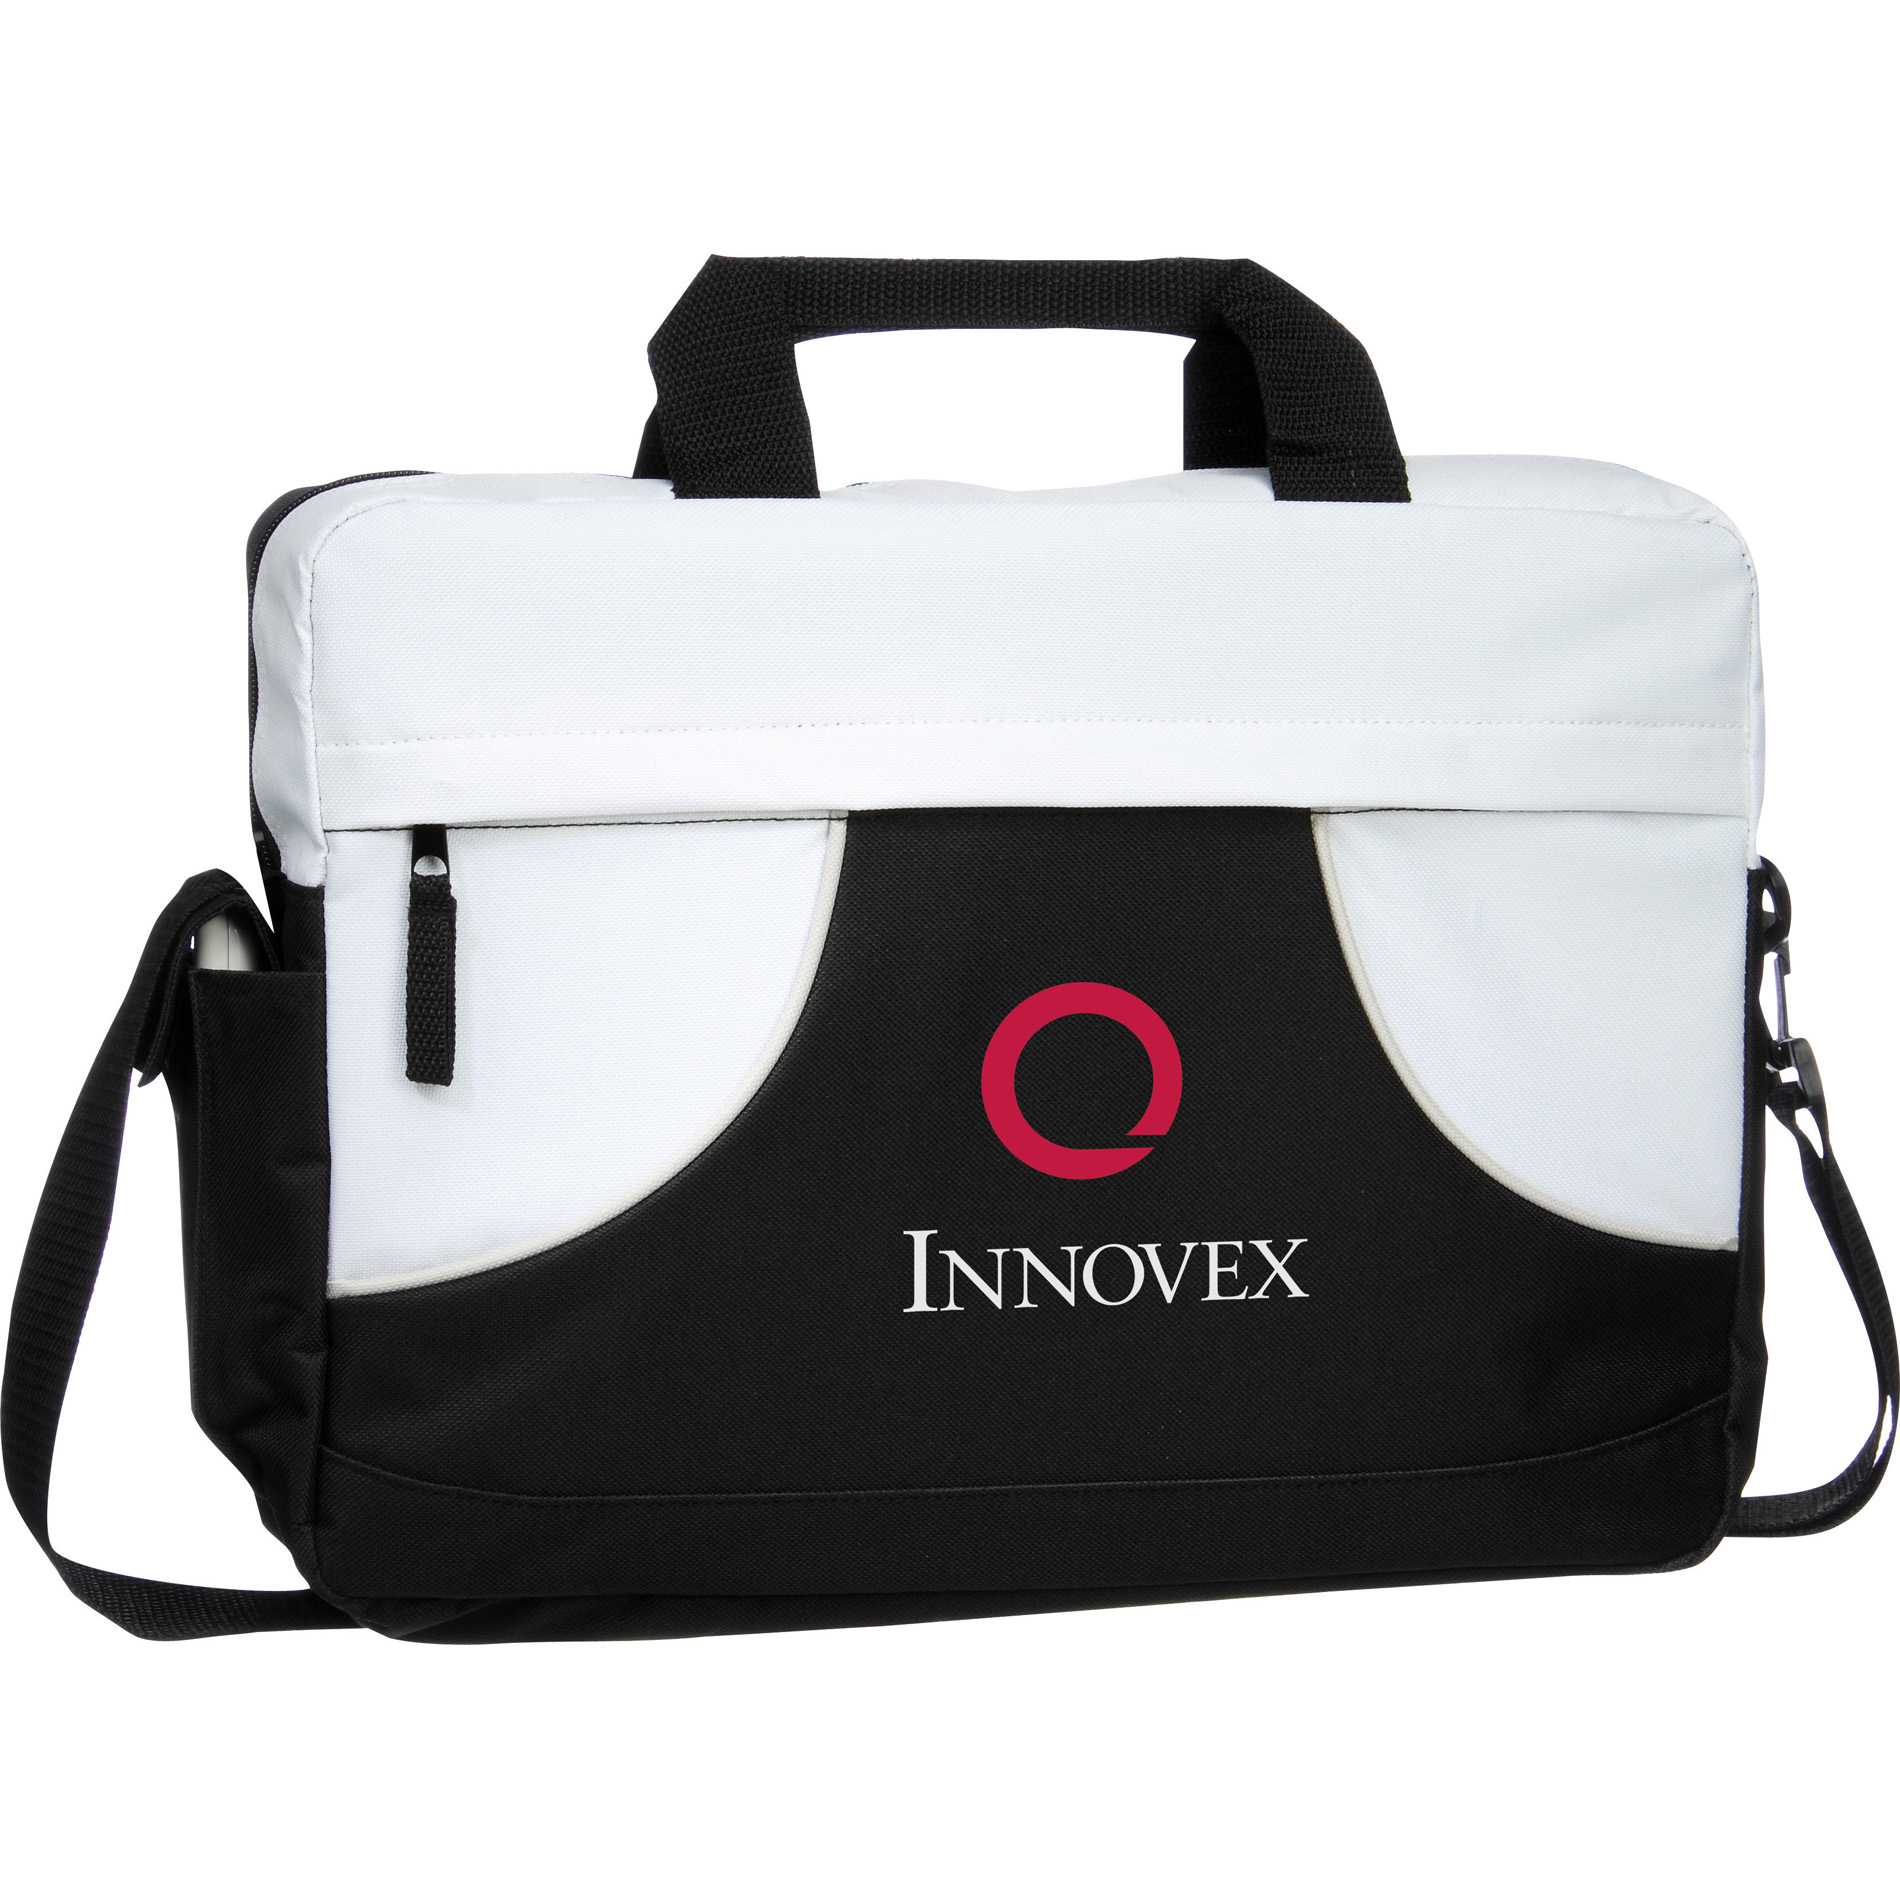 Promotional Bags | Business Cases